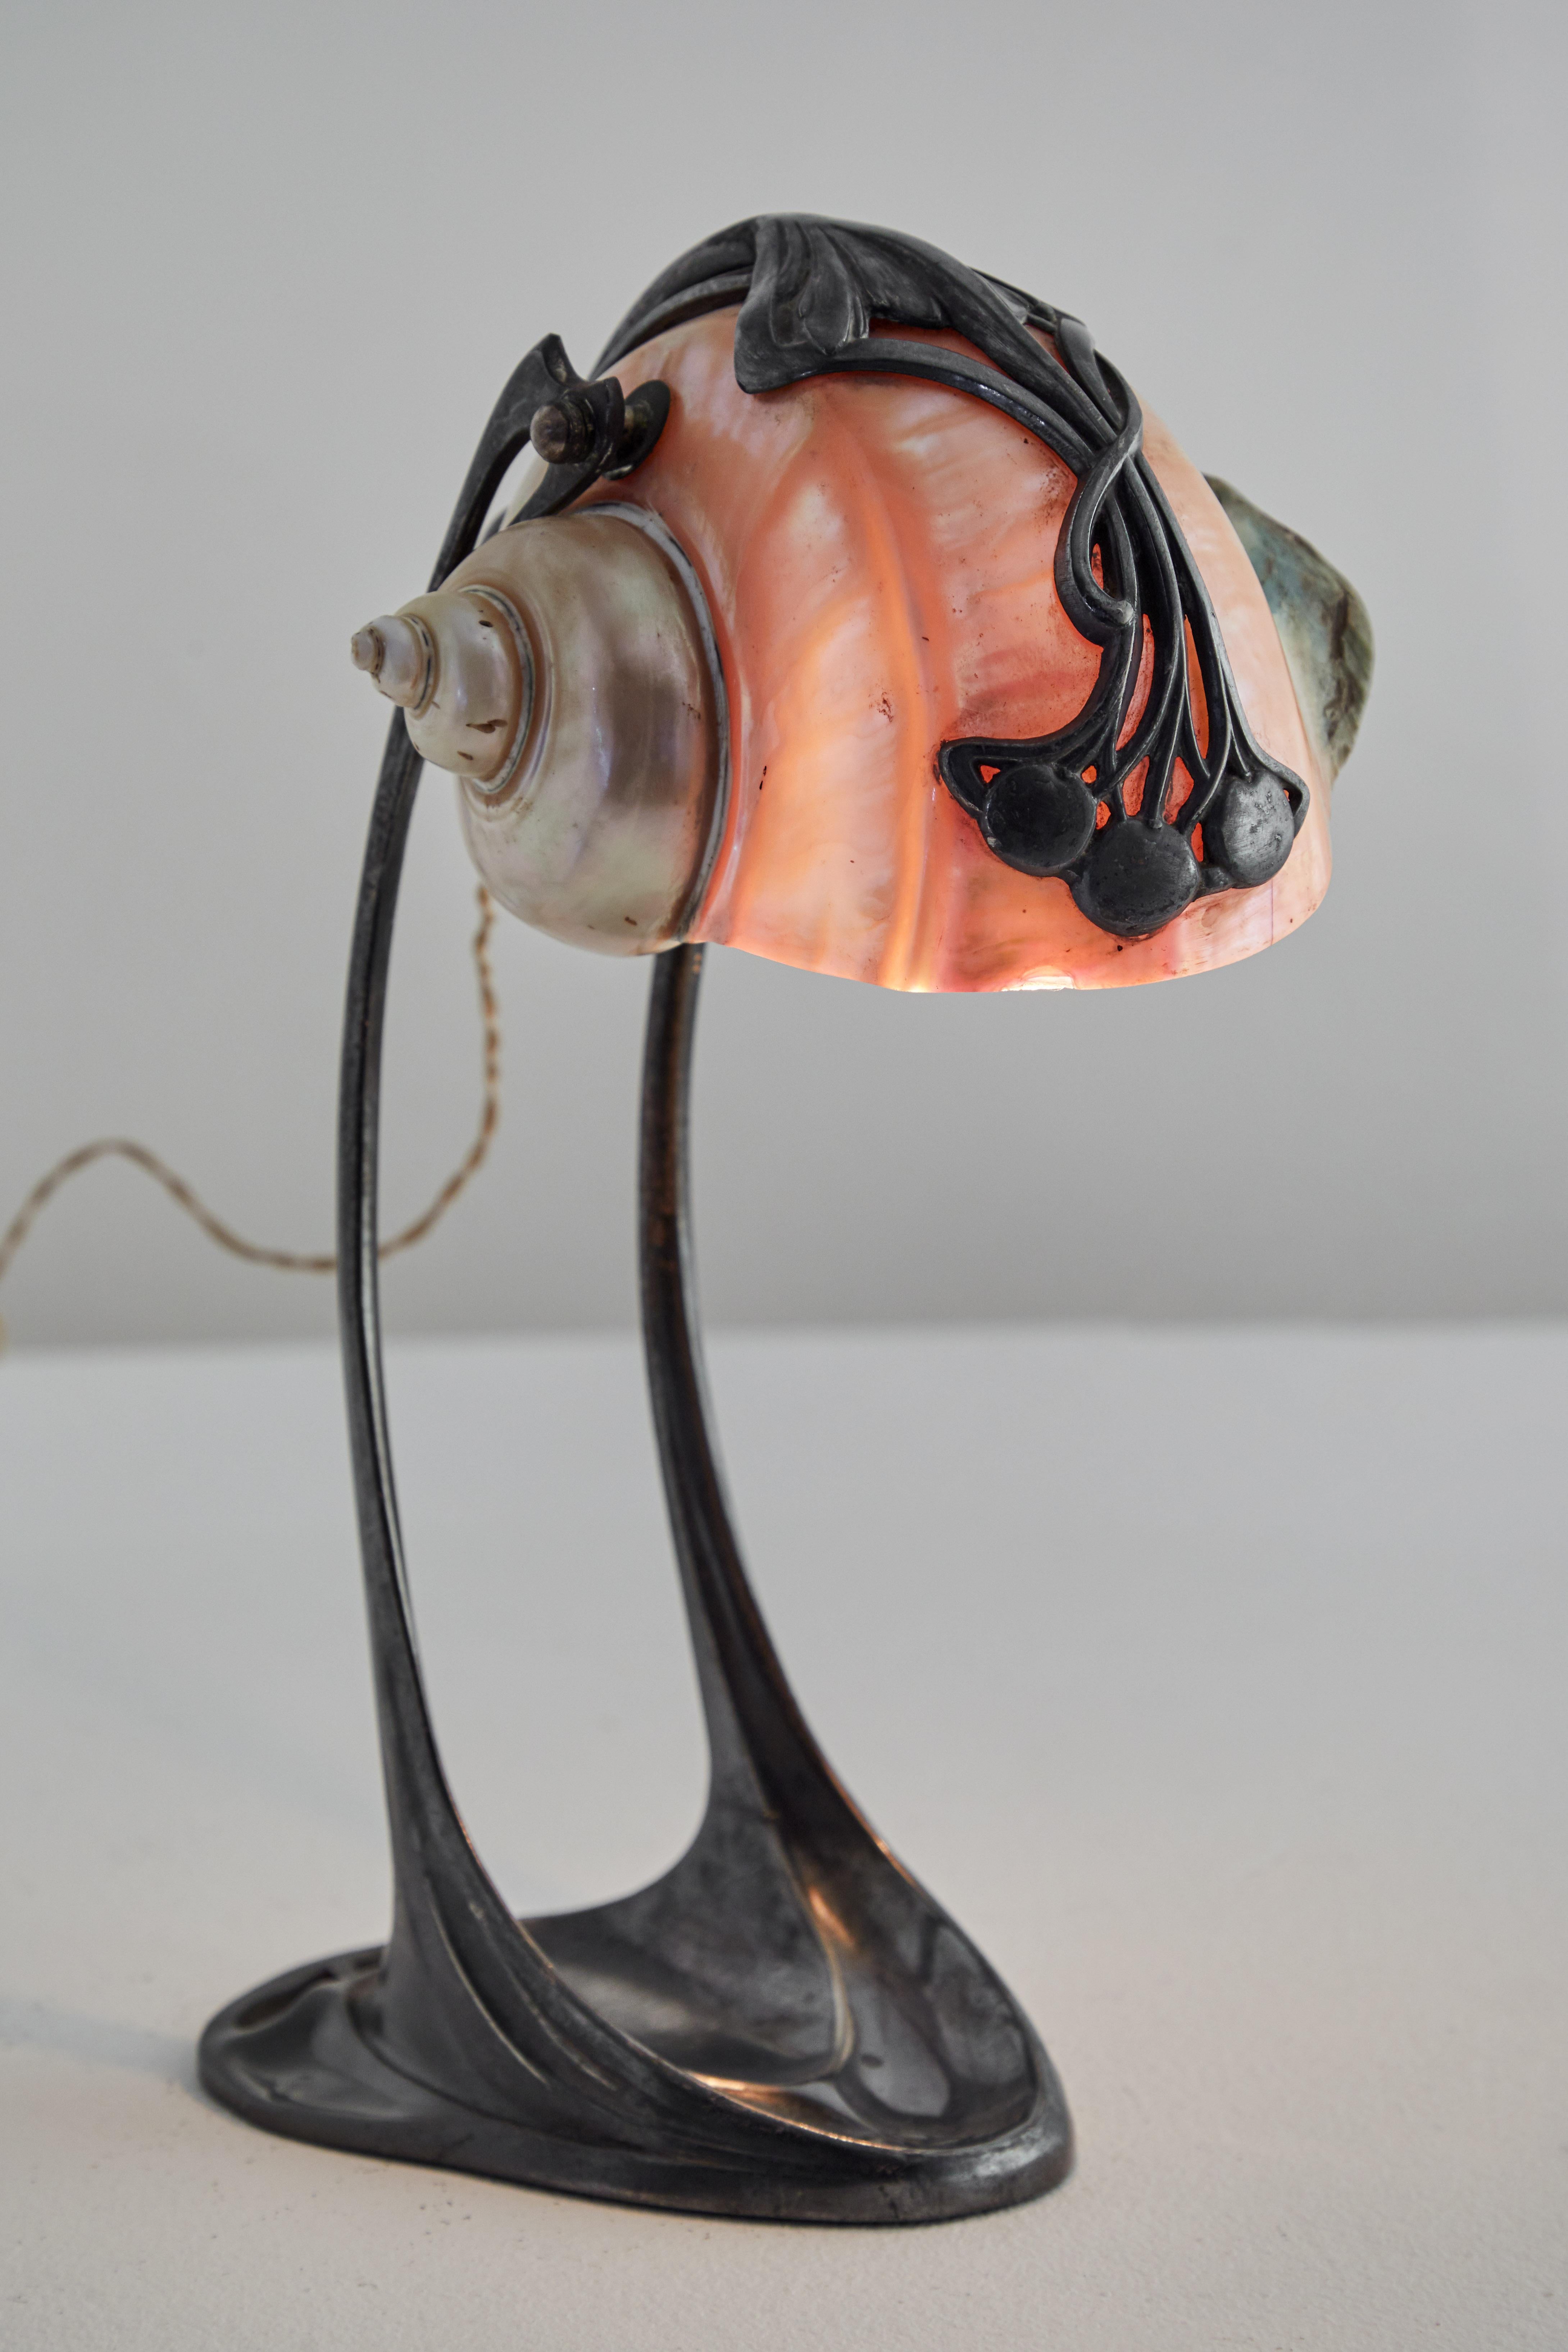 Nautilus Table Lamp by Moritz Hacker.Designed and manufactured in the Austria, early 1900's. Original cord. Natural shell and pewter. Retains original manufacturers stamp MH20. Takes one e27 75w maximum bulb. Bulbs provided as a one time courtesy.